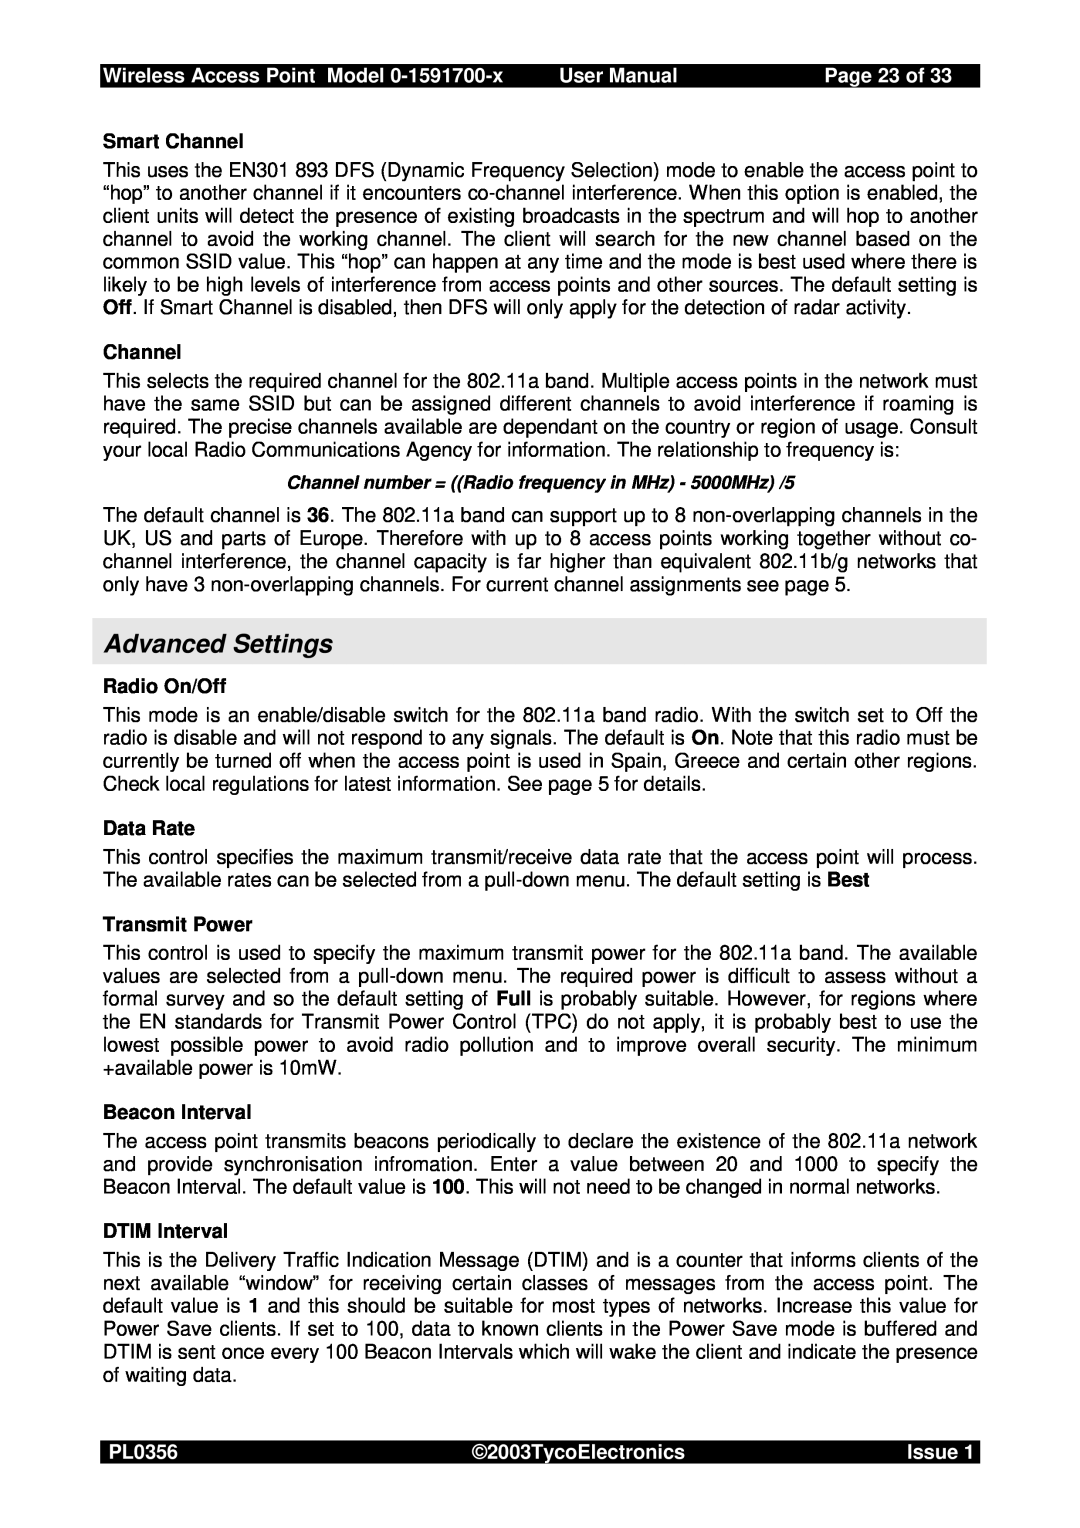 Tyco 0-1591700-x Advanced Settings, Page 23 of, Wireless Access Point Model, User Manual, PL0356, 2003TycoElectronics 